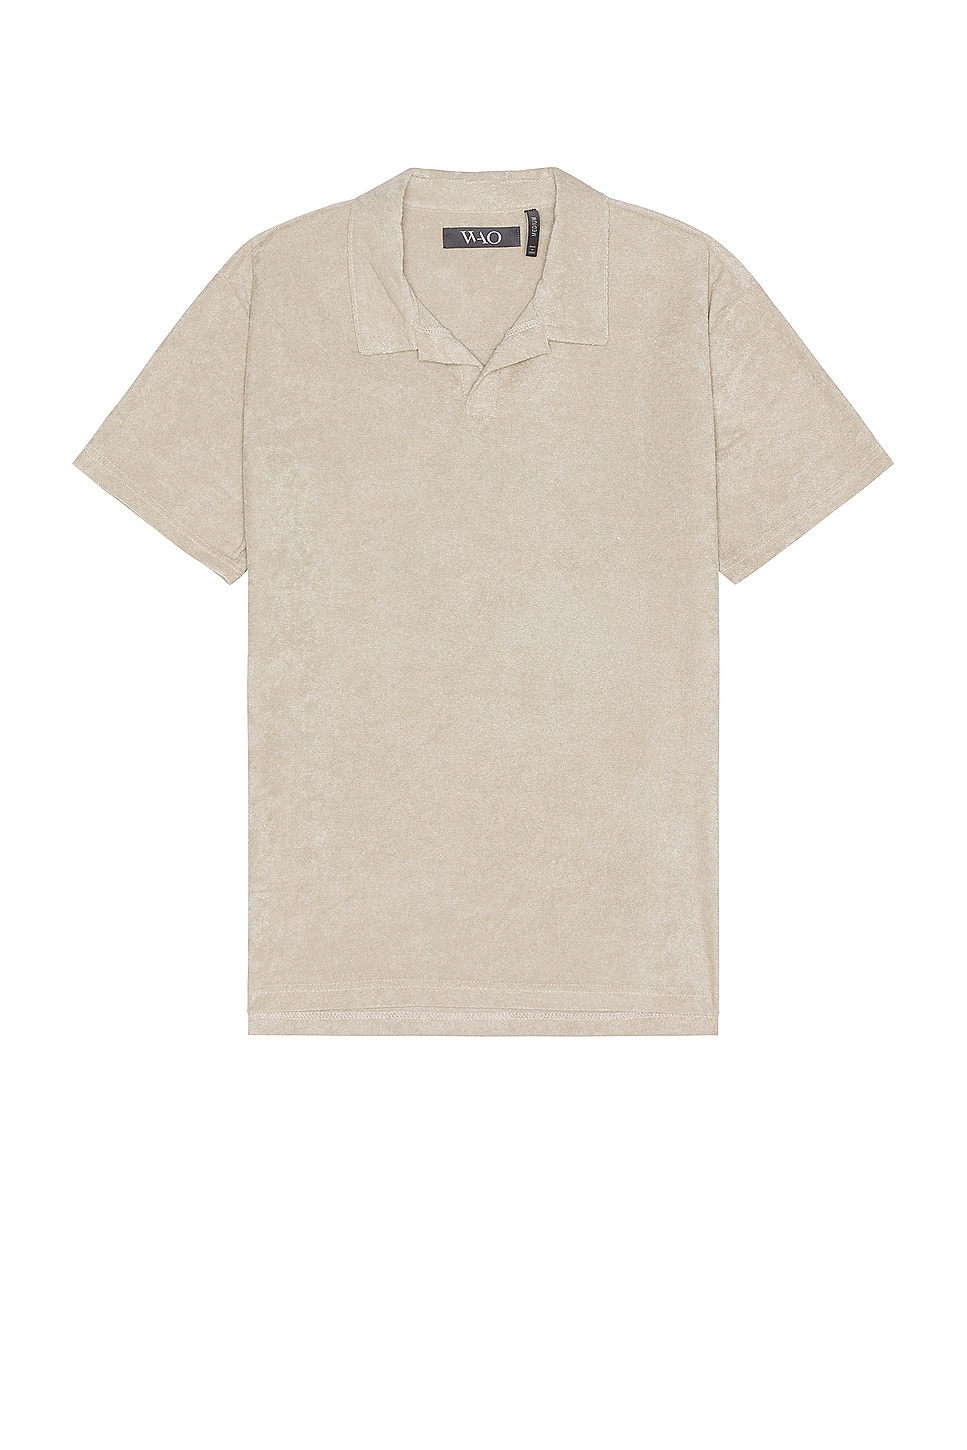 Image 1 of WAO Towel Terry Polo in Tan